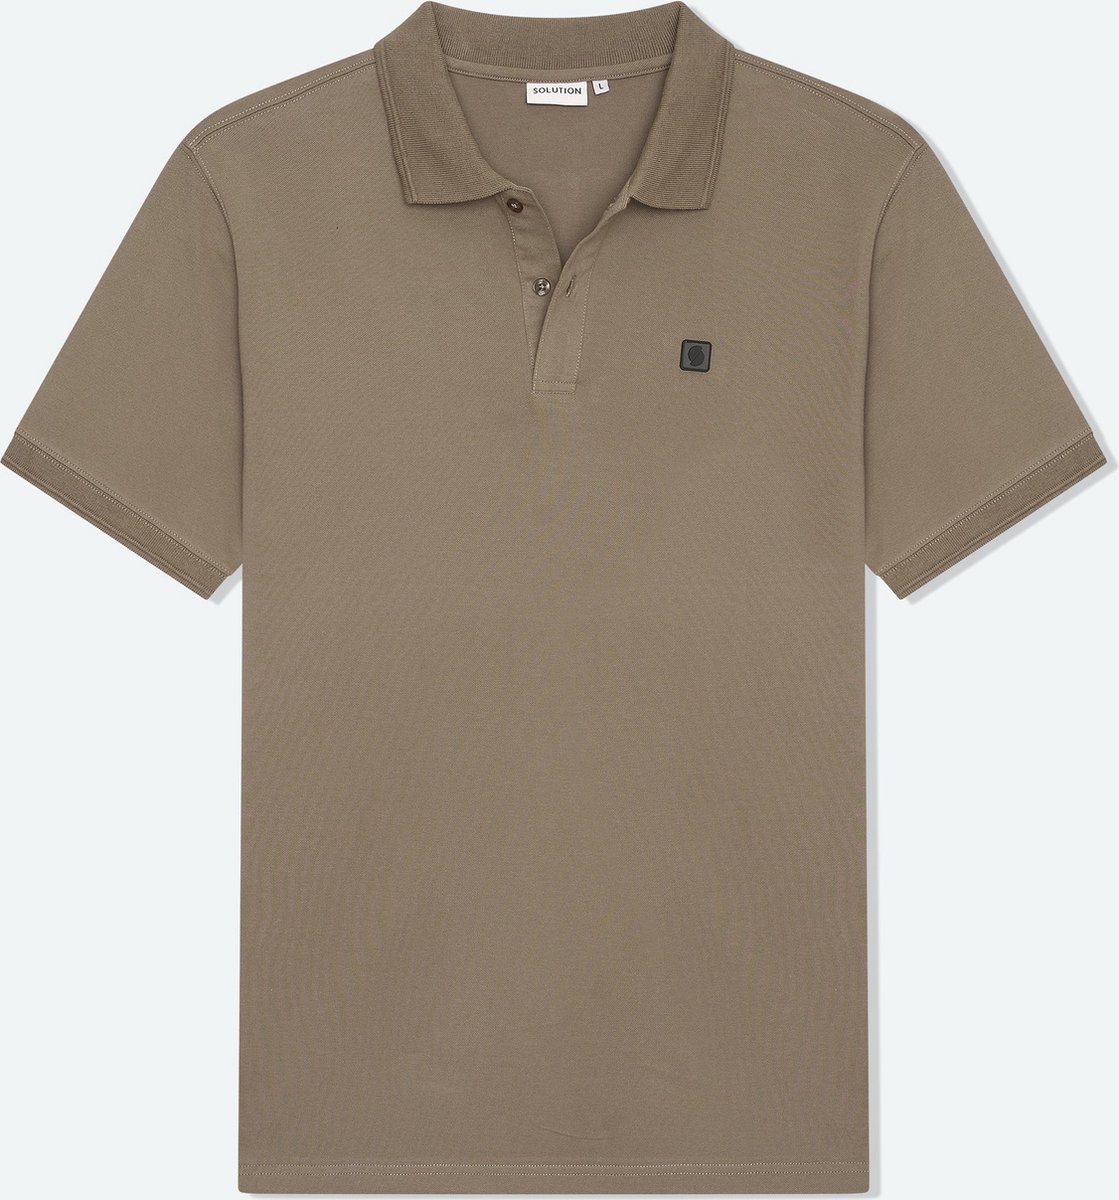 Solution Clothing Olympus - Casual Polo - Knoopsluiting - Korte Mouwen - Volwassenen - Heren - Mannen - Taupe - Beige - S - S - Solution Clothing